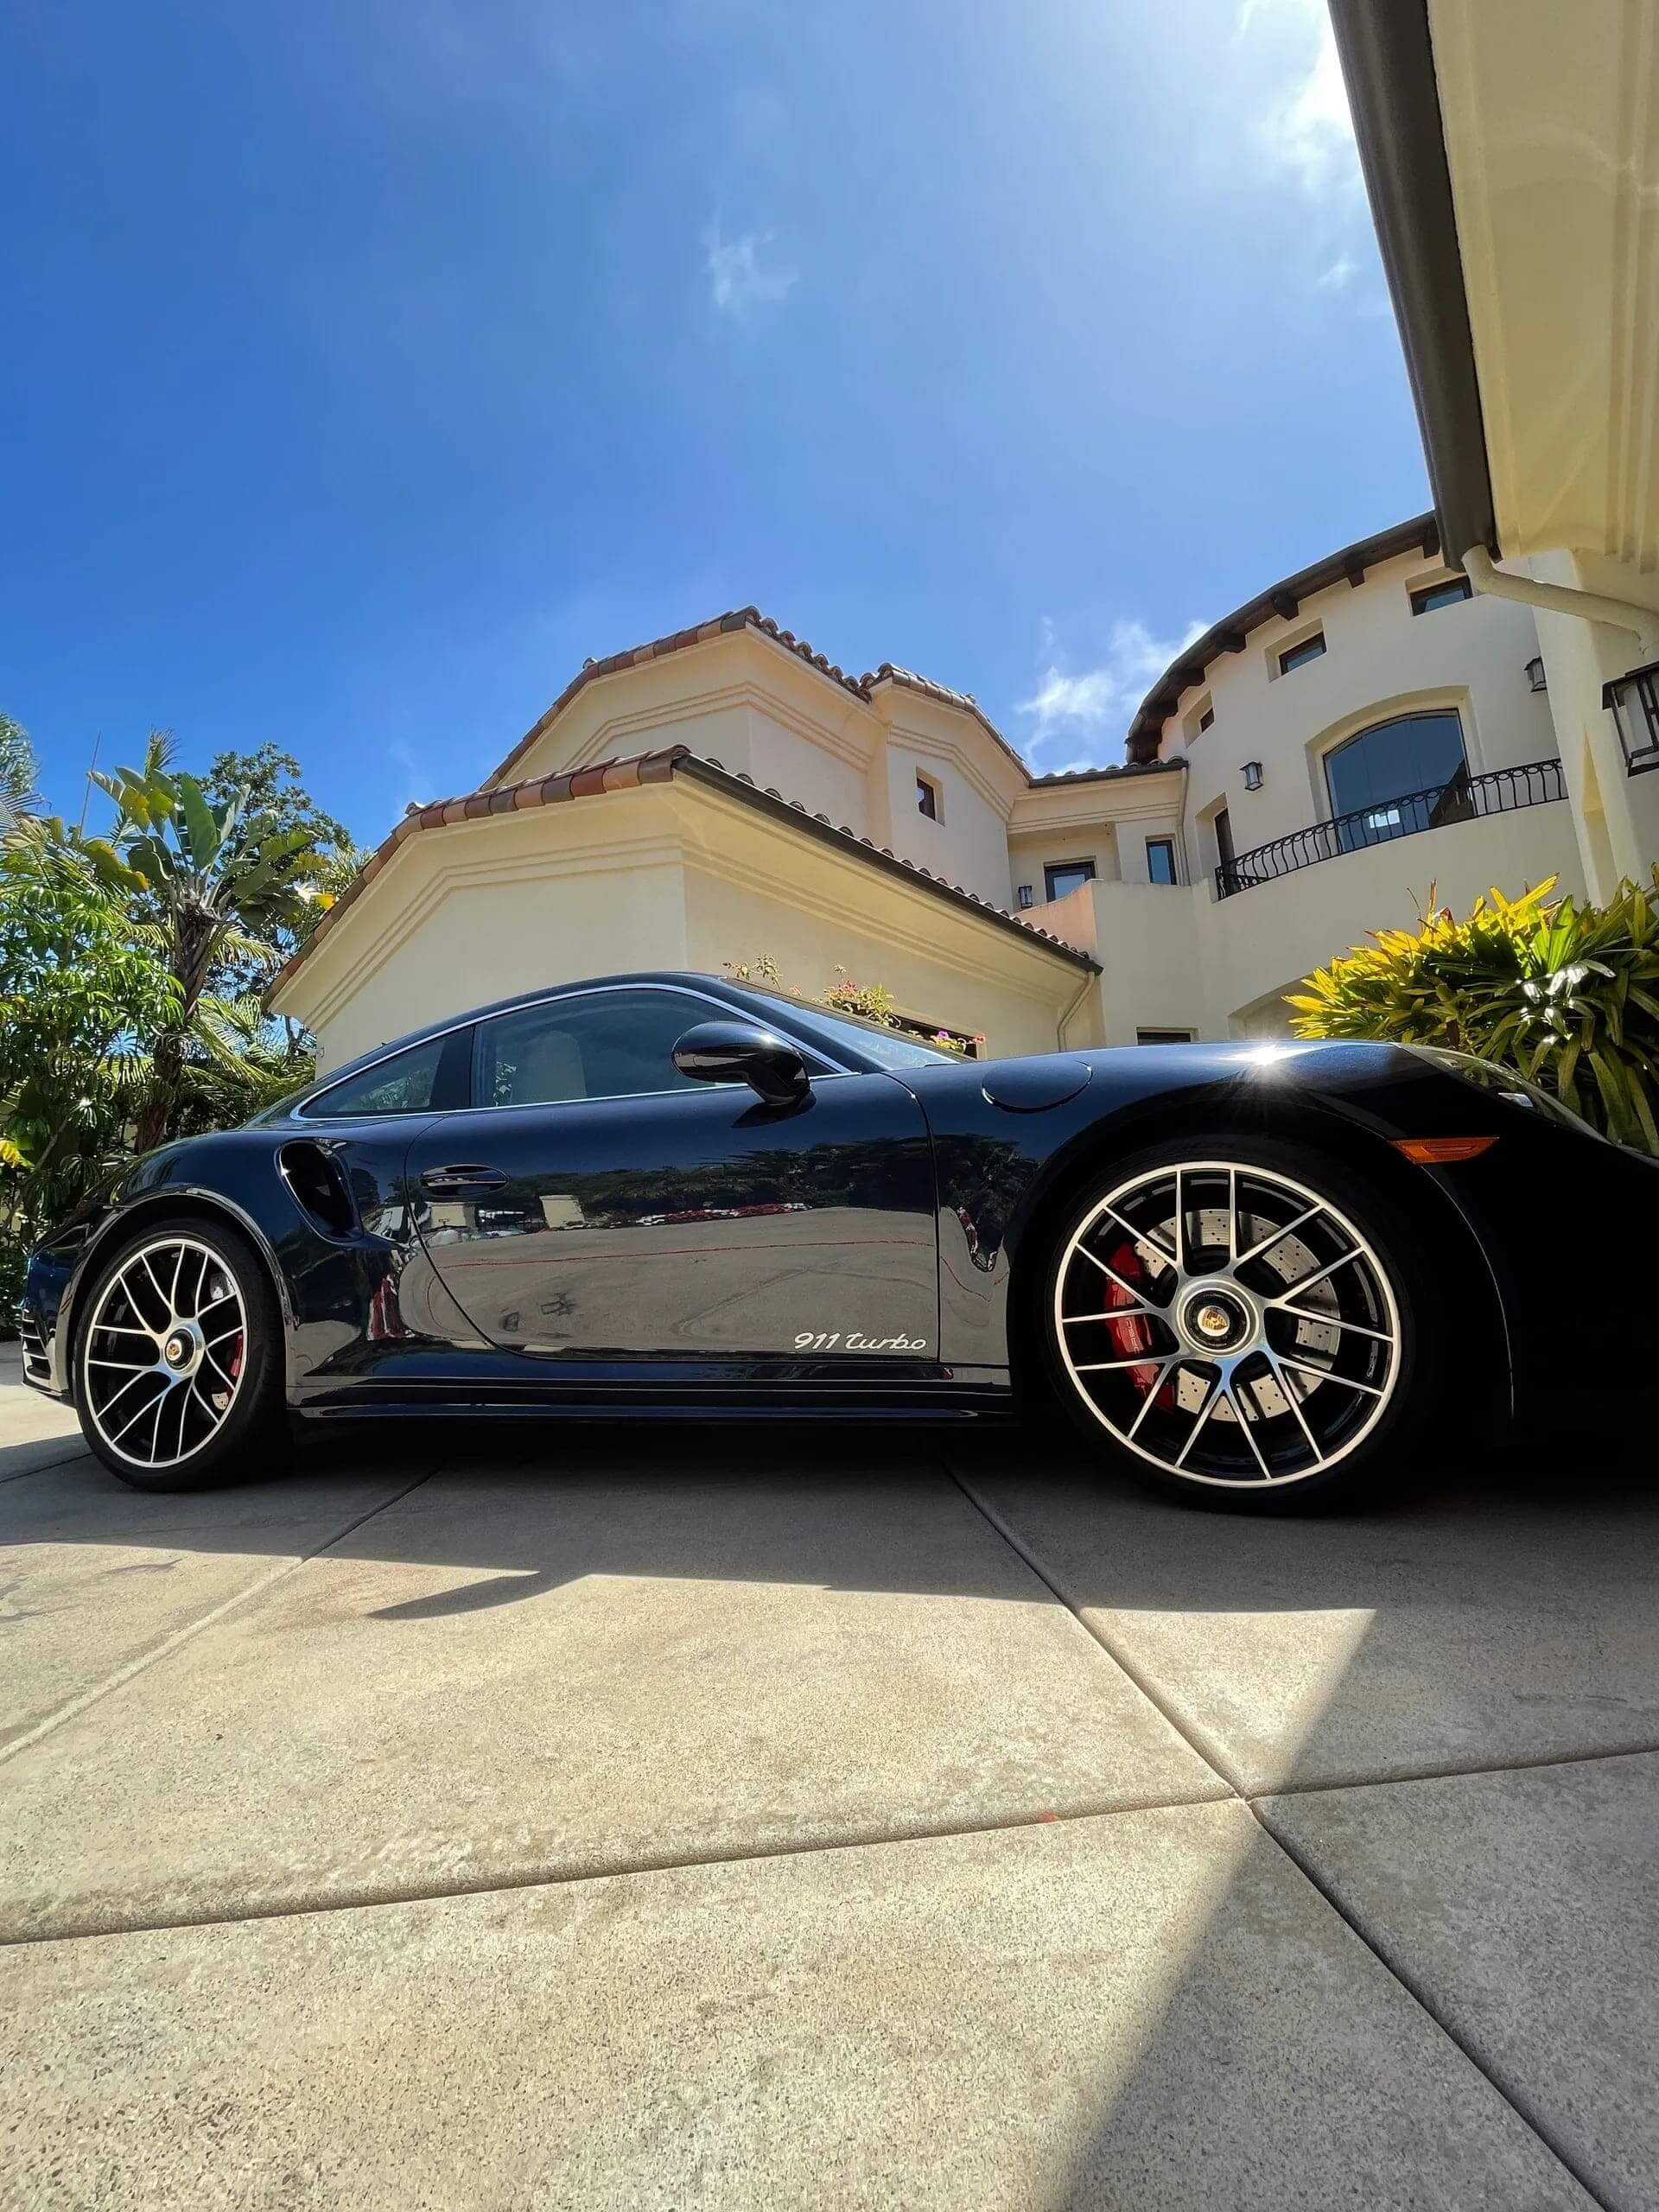 Dark Blue Porsche 911 Turbo parked infront of house and freshly detailed.